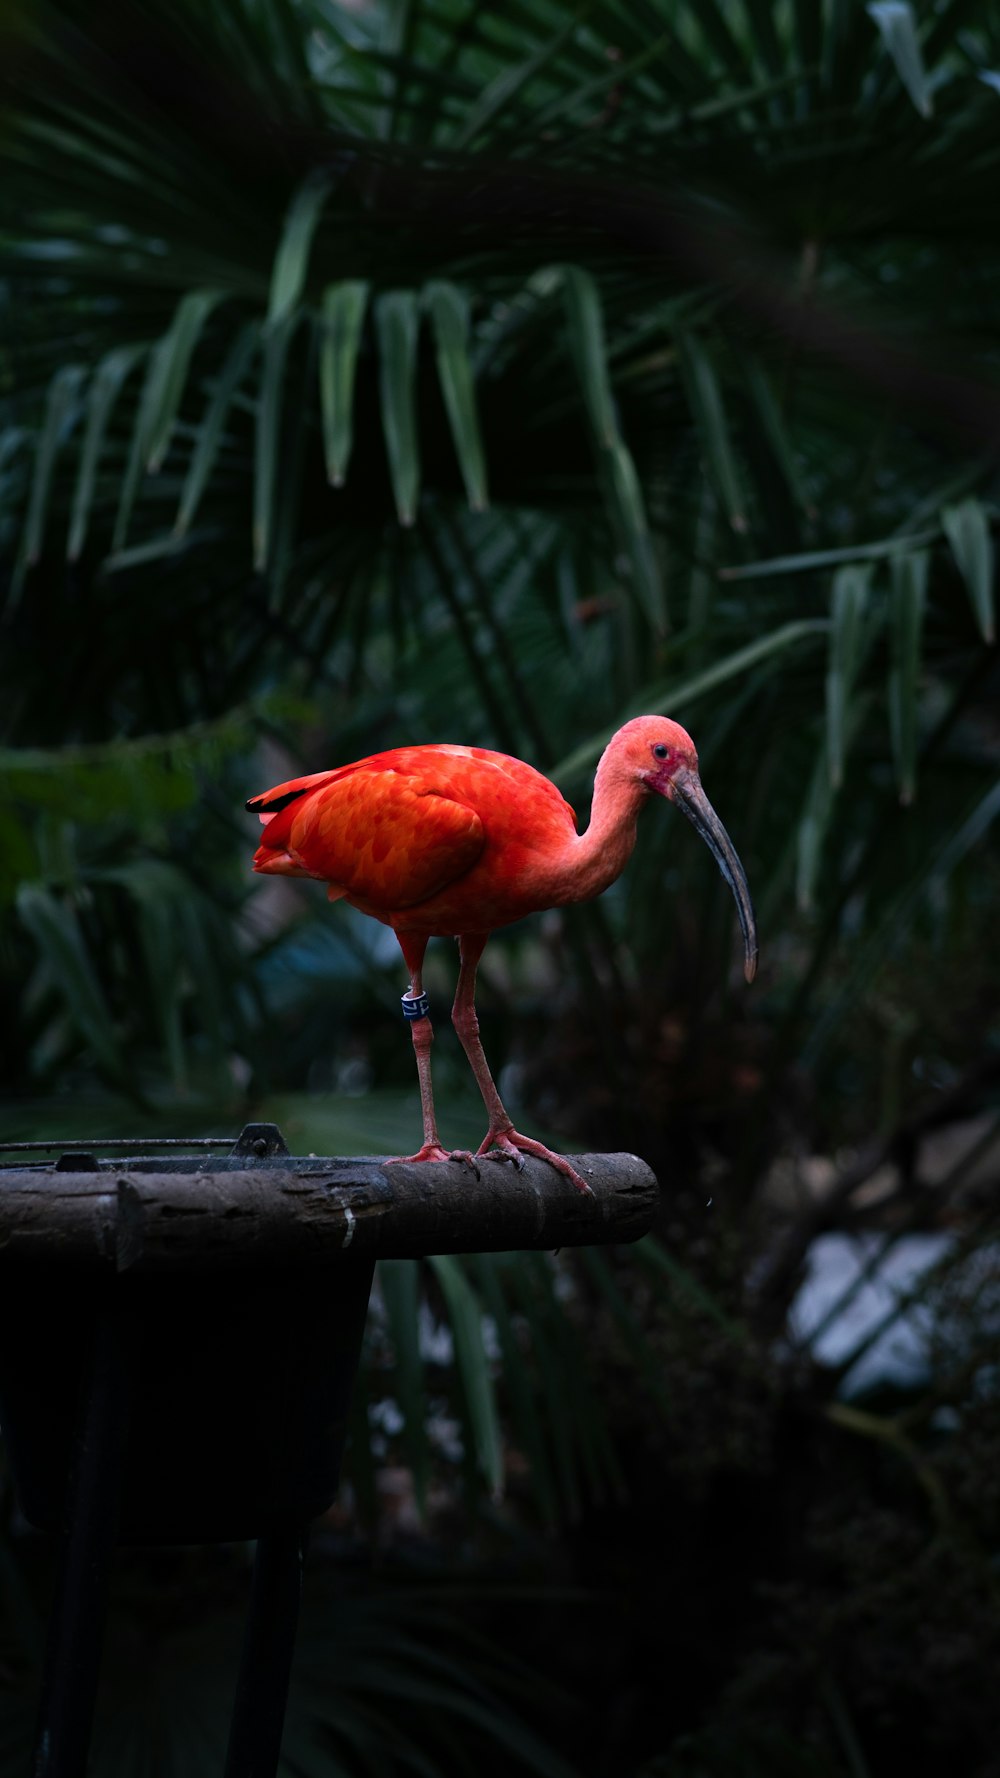 a red bird with a long beak standing on a table